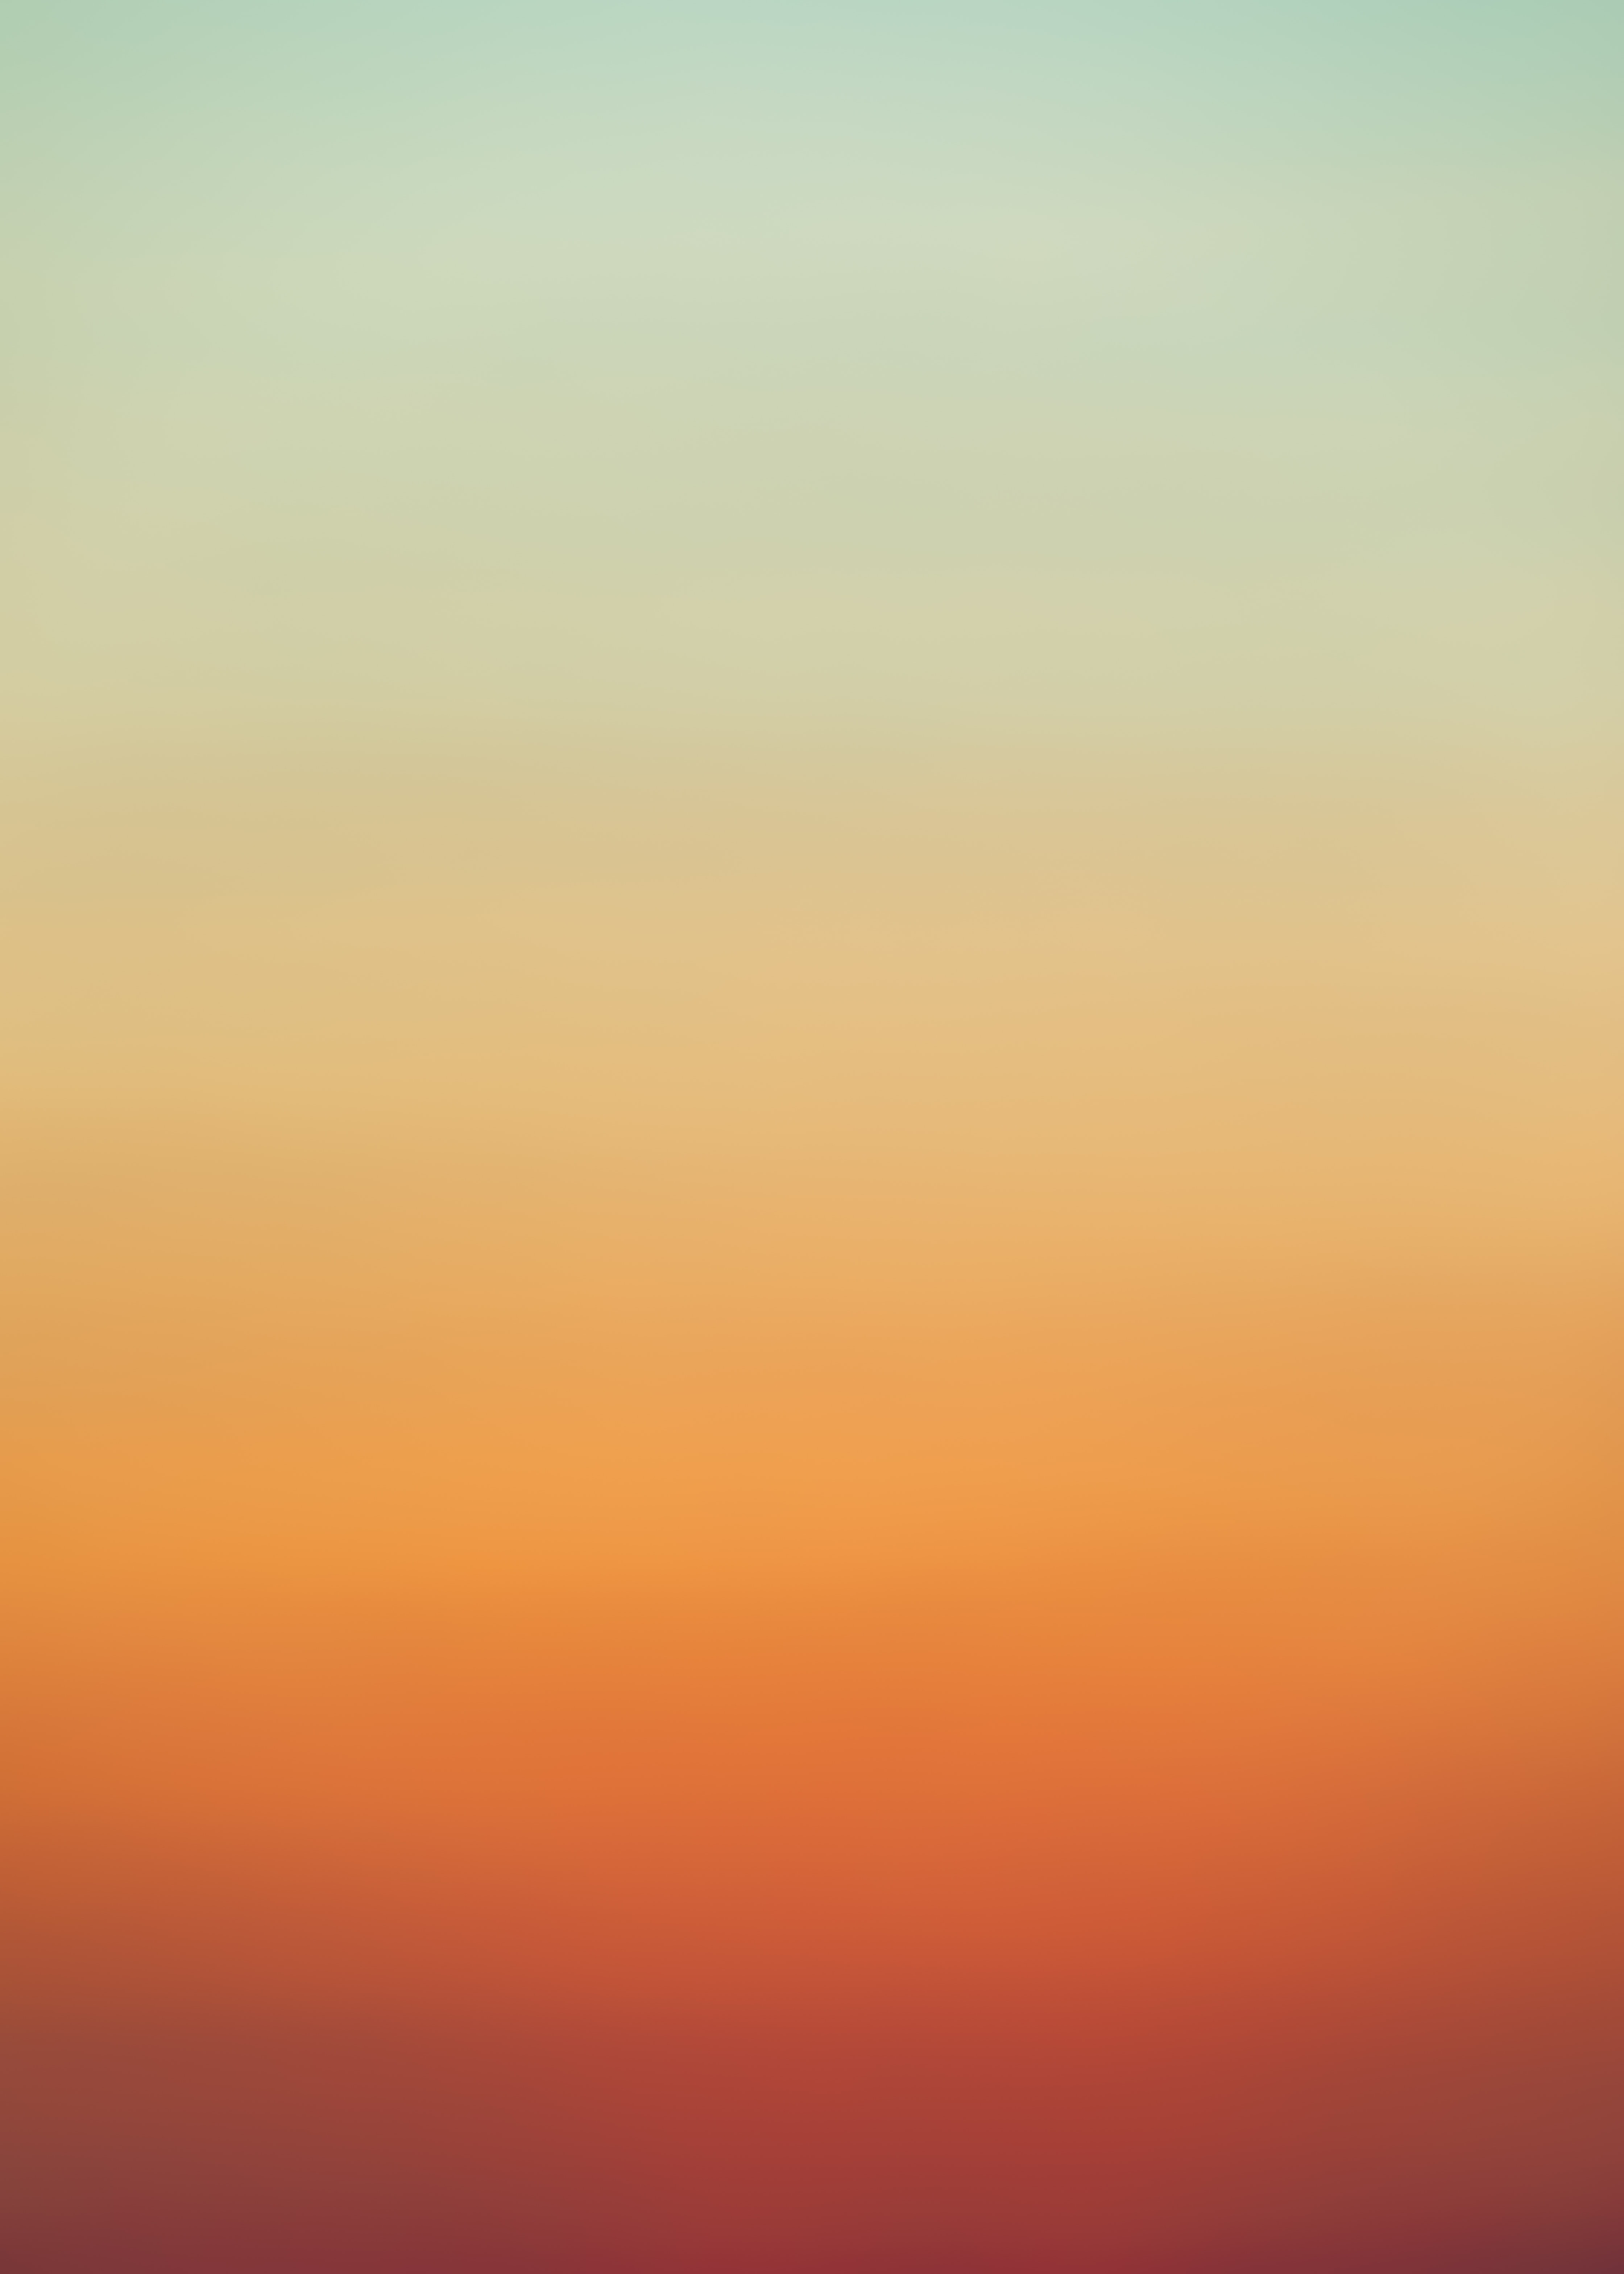 gradient, abstract, background, yellow, orange, color phone wallpaper